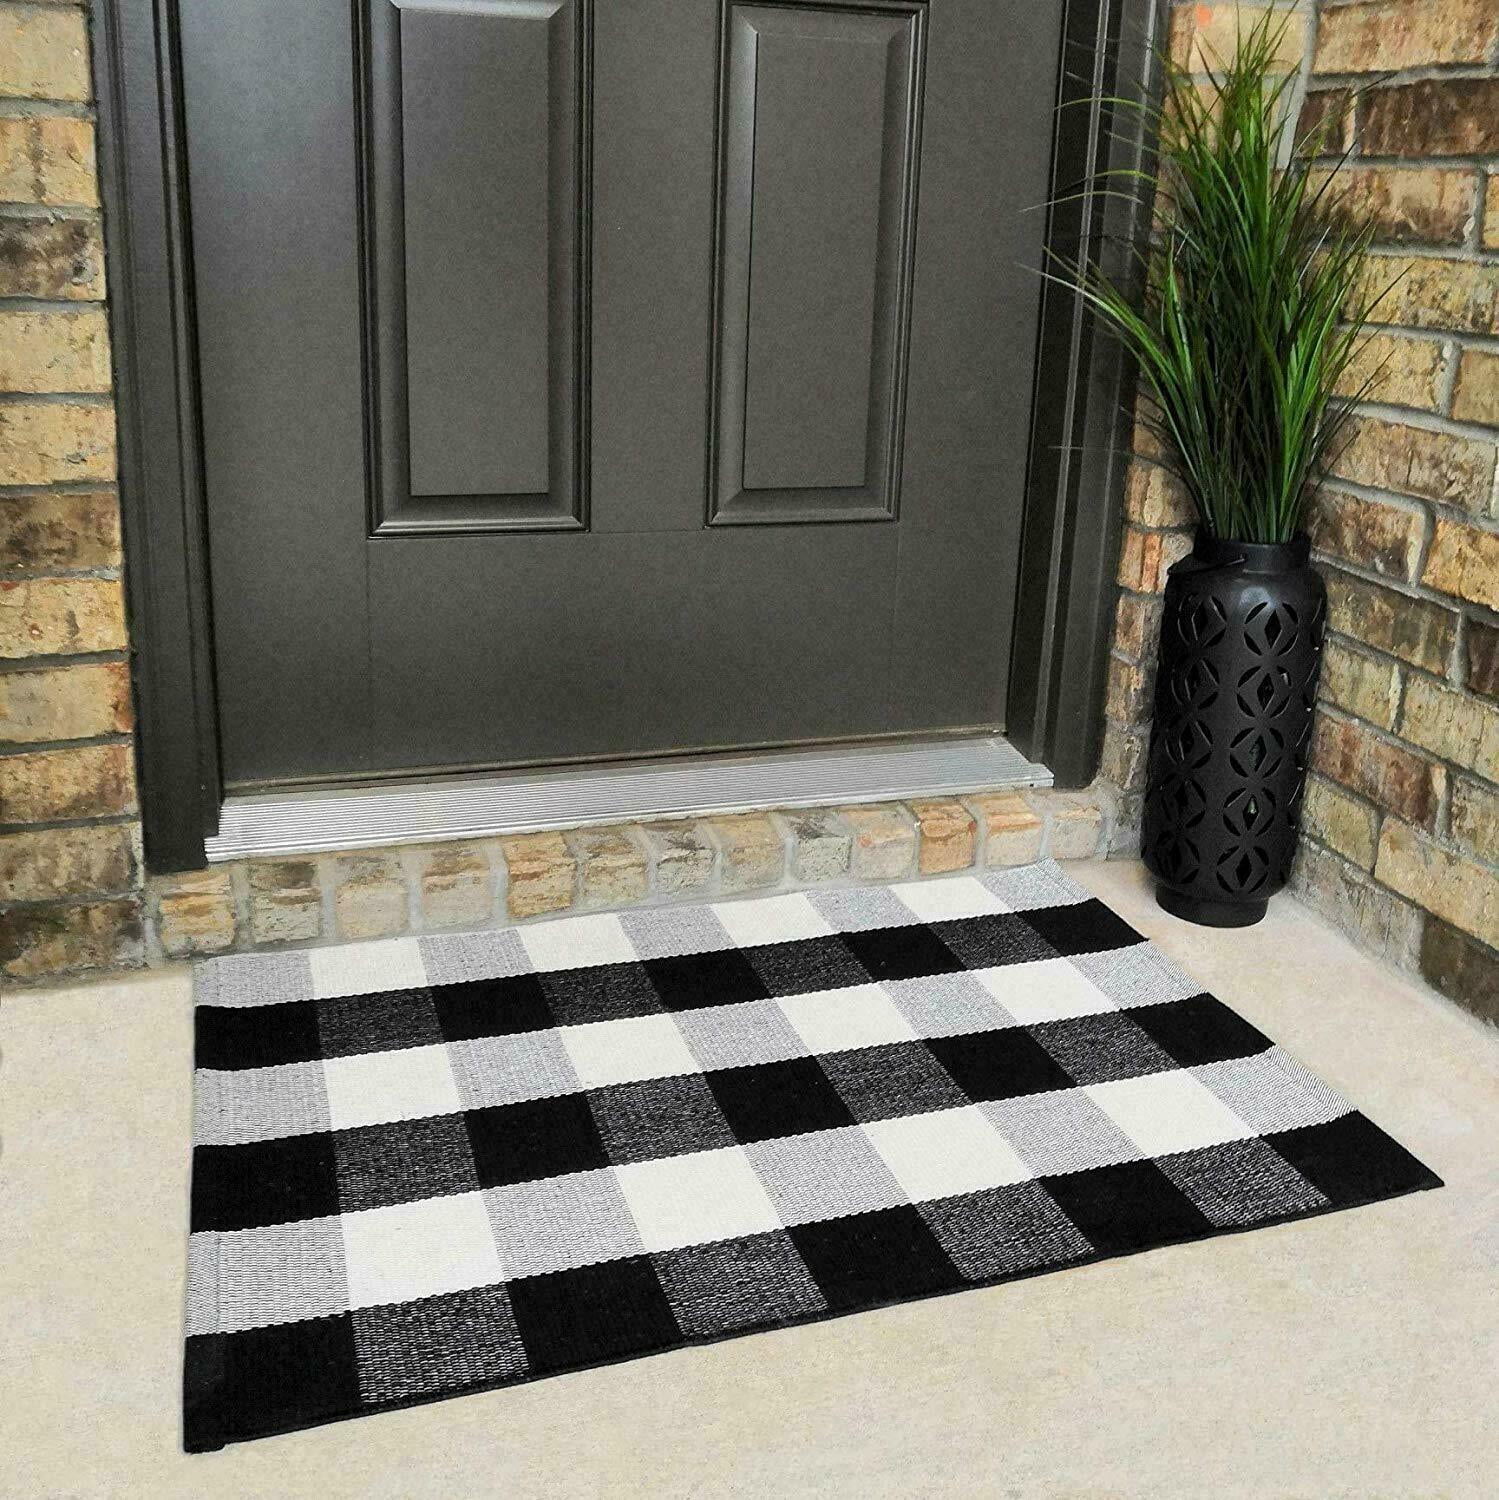 Cotton Buffalo Plaid Rugs Black And White Checkered Rug Welcome